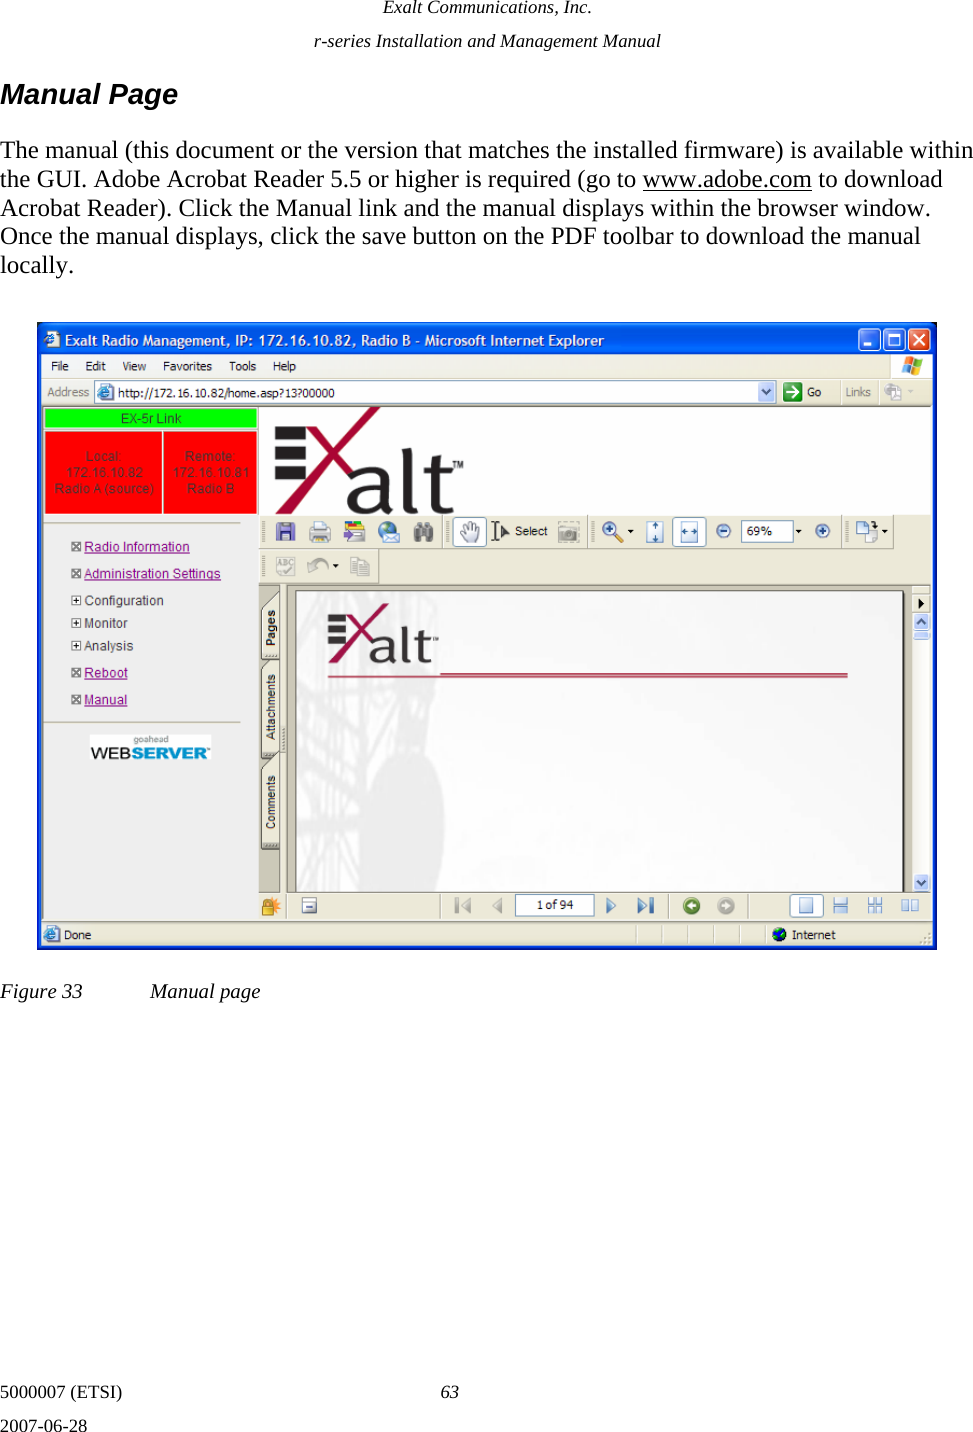 Exalt Communications, Inc. r-series Installation and Management Manual 5000007 (ETSI)  63 2007-06-28  Manual Page The manual (this document or the version that matches the installed firmware) is available within the GUI. Adobe Acrobat Reader 5.5 or higher is required (go to www.adobe.com to download Acrobat Reader). Click the Manual link and the manual displays within the browser window. Once the manual displays, click the save button on the PDF toolbar to download the manual locally. Figure 33  Manual page 